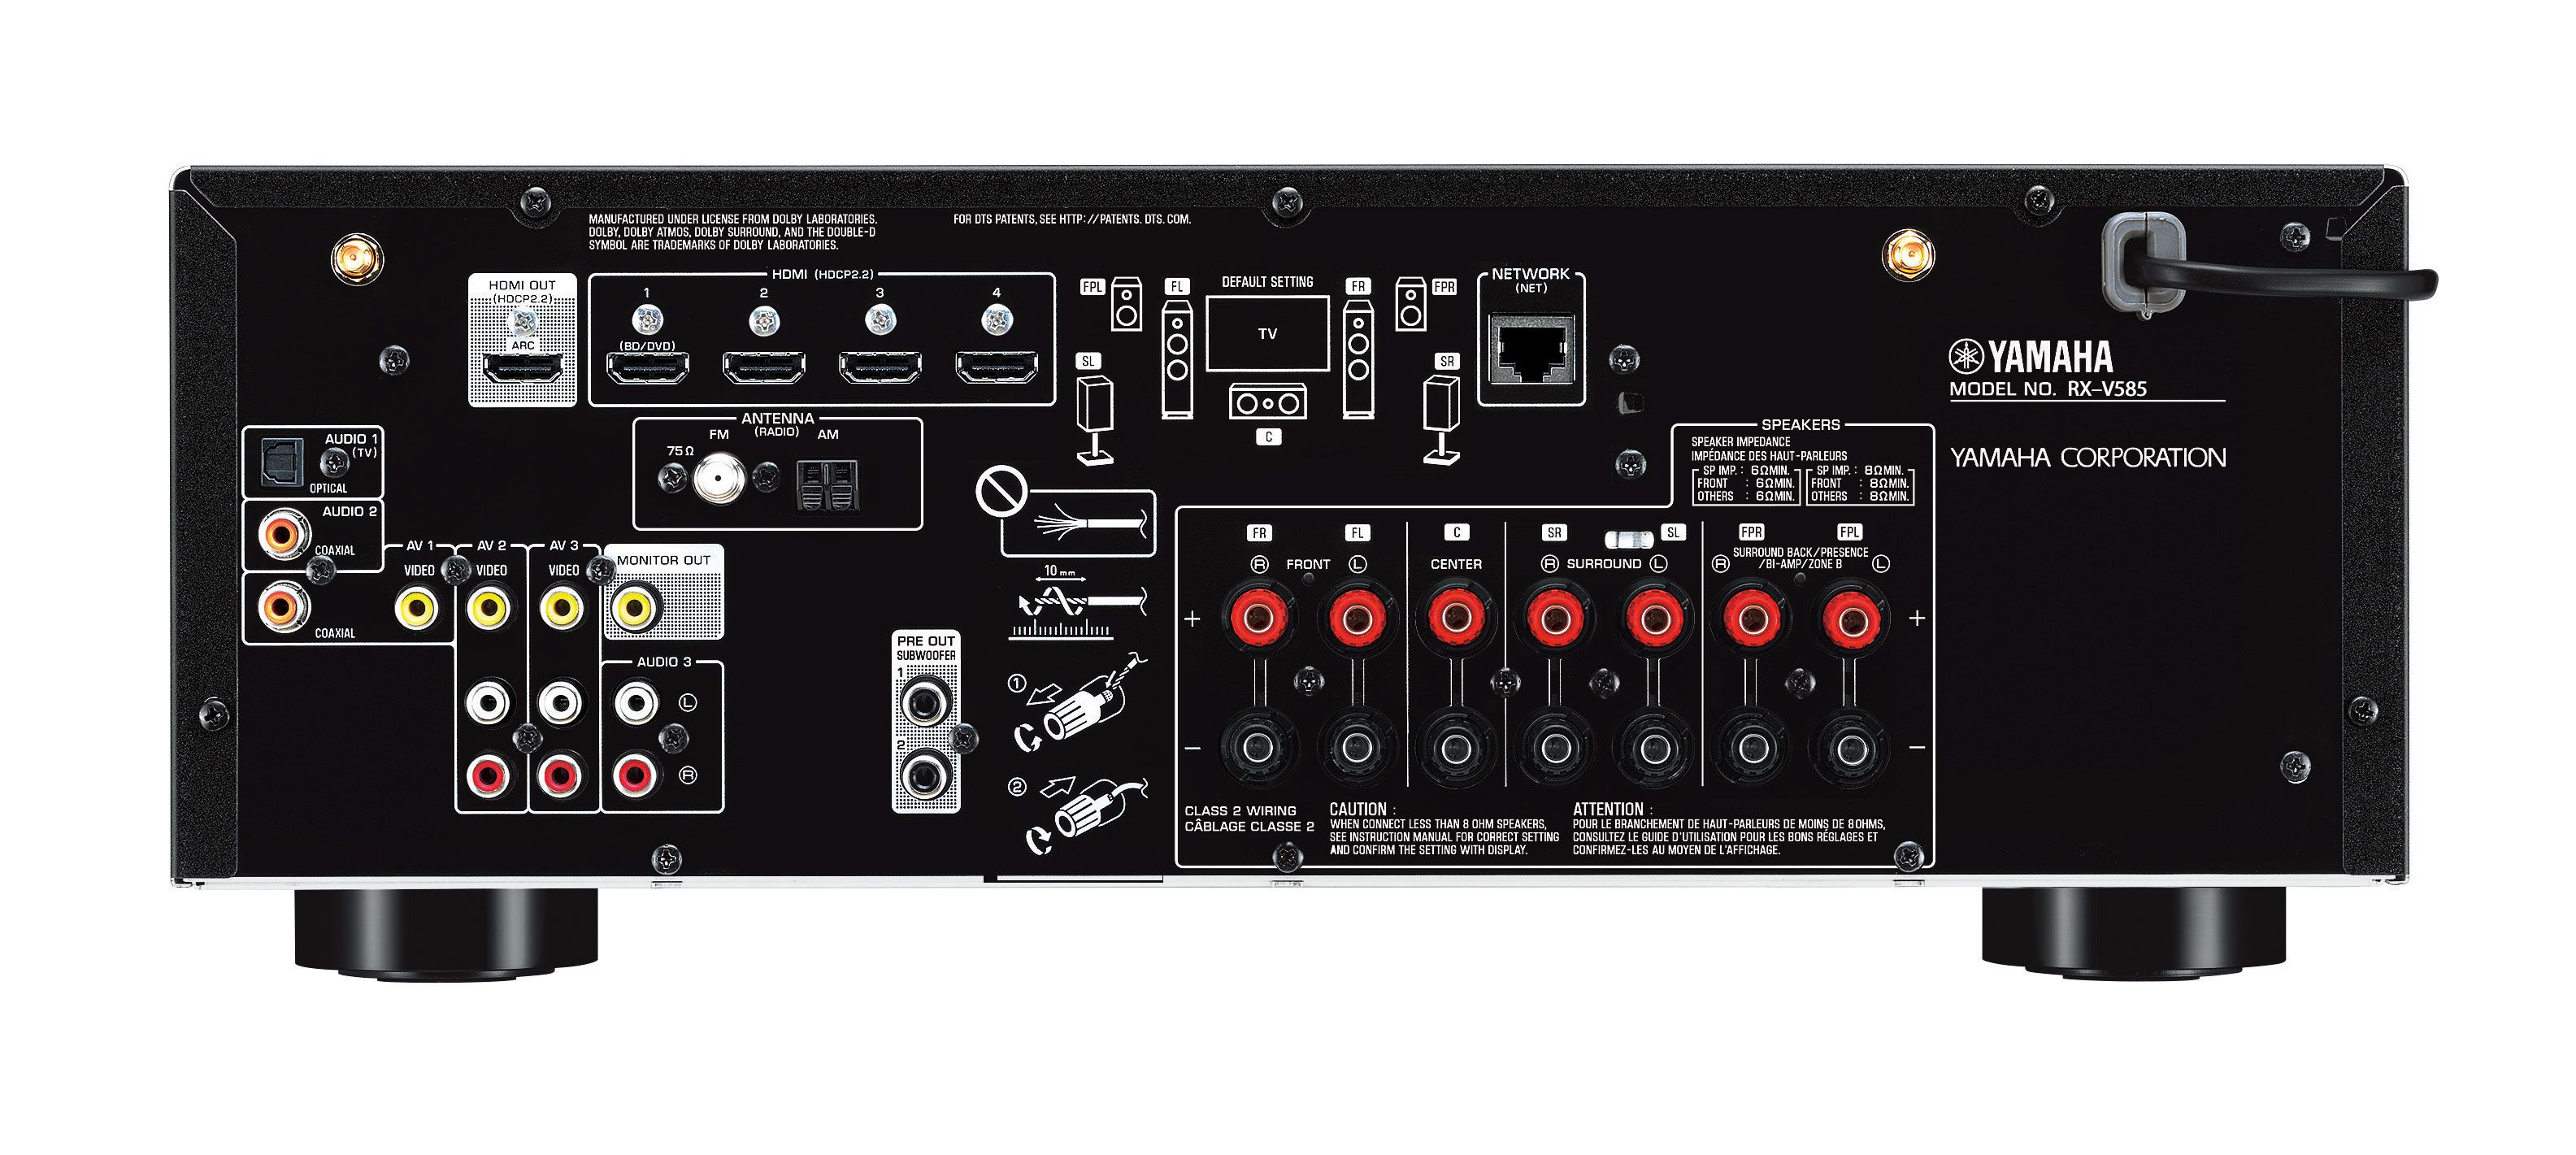 RX-V585 - Support - AV Receivers - Audio & Visual - Products 